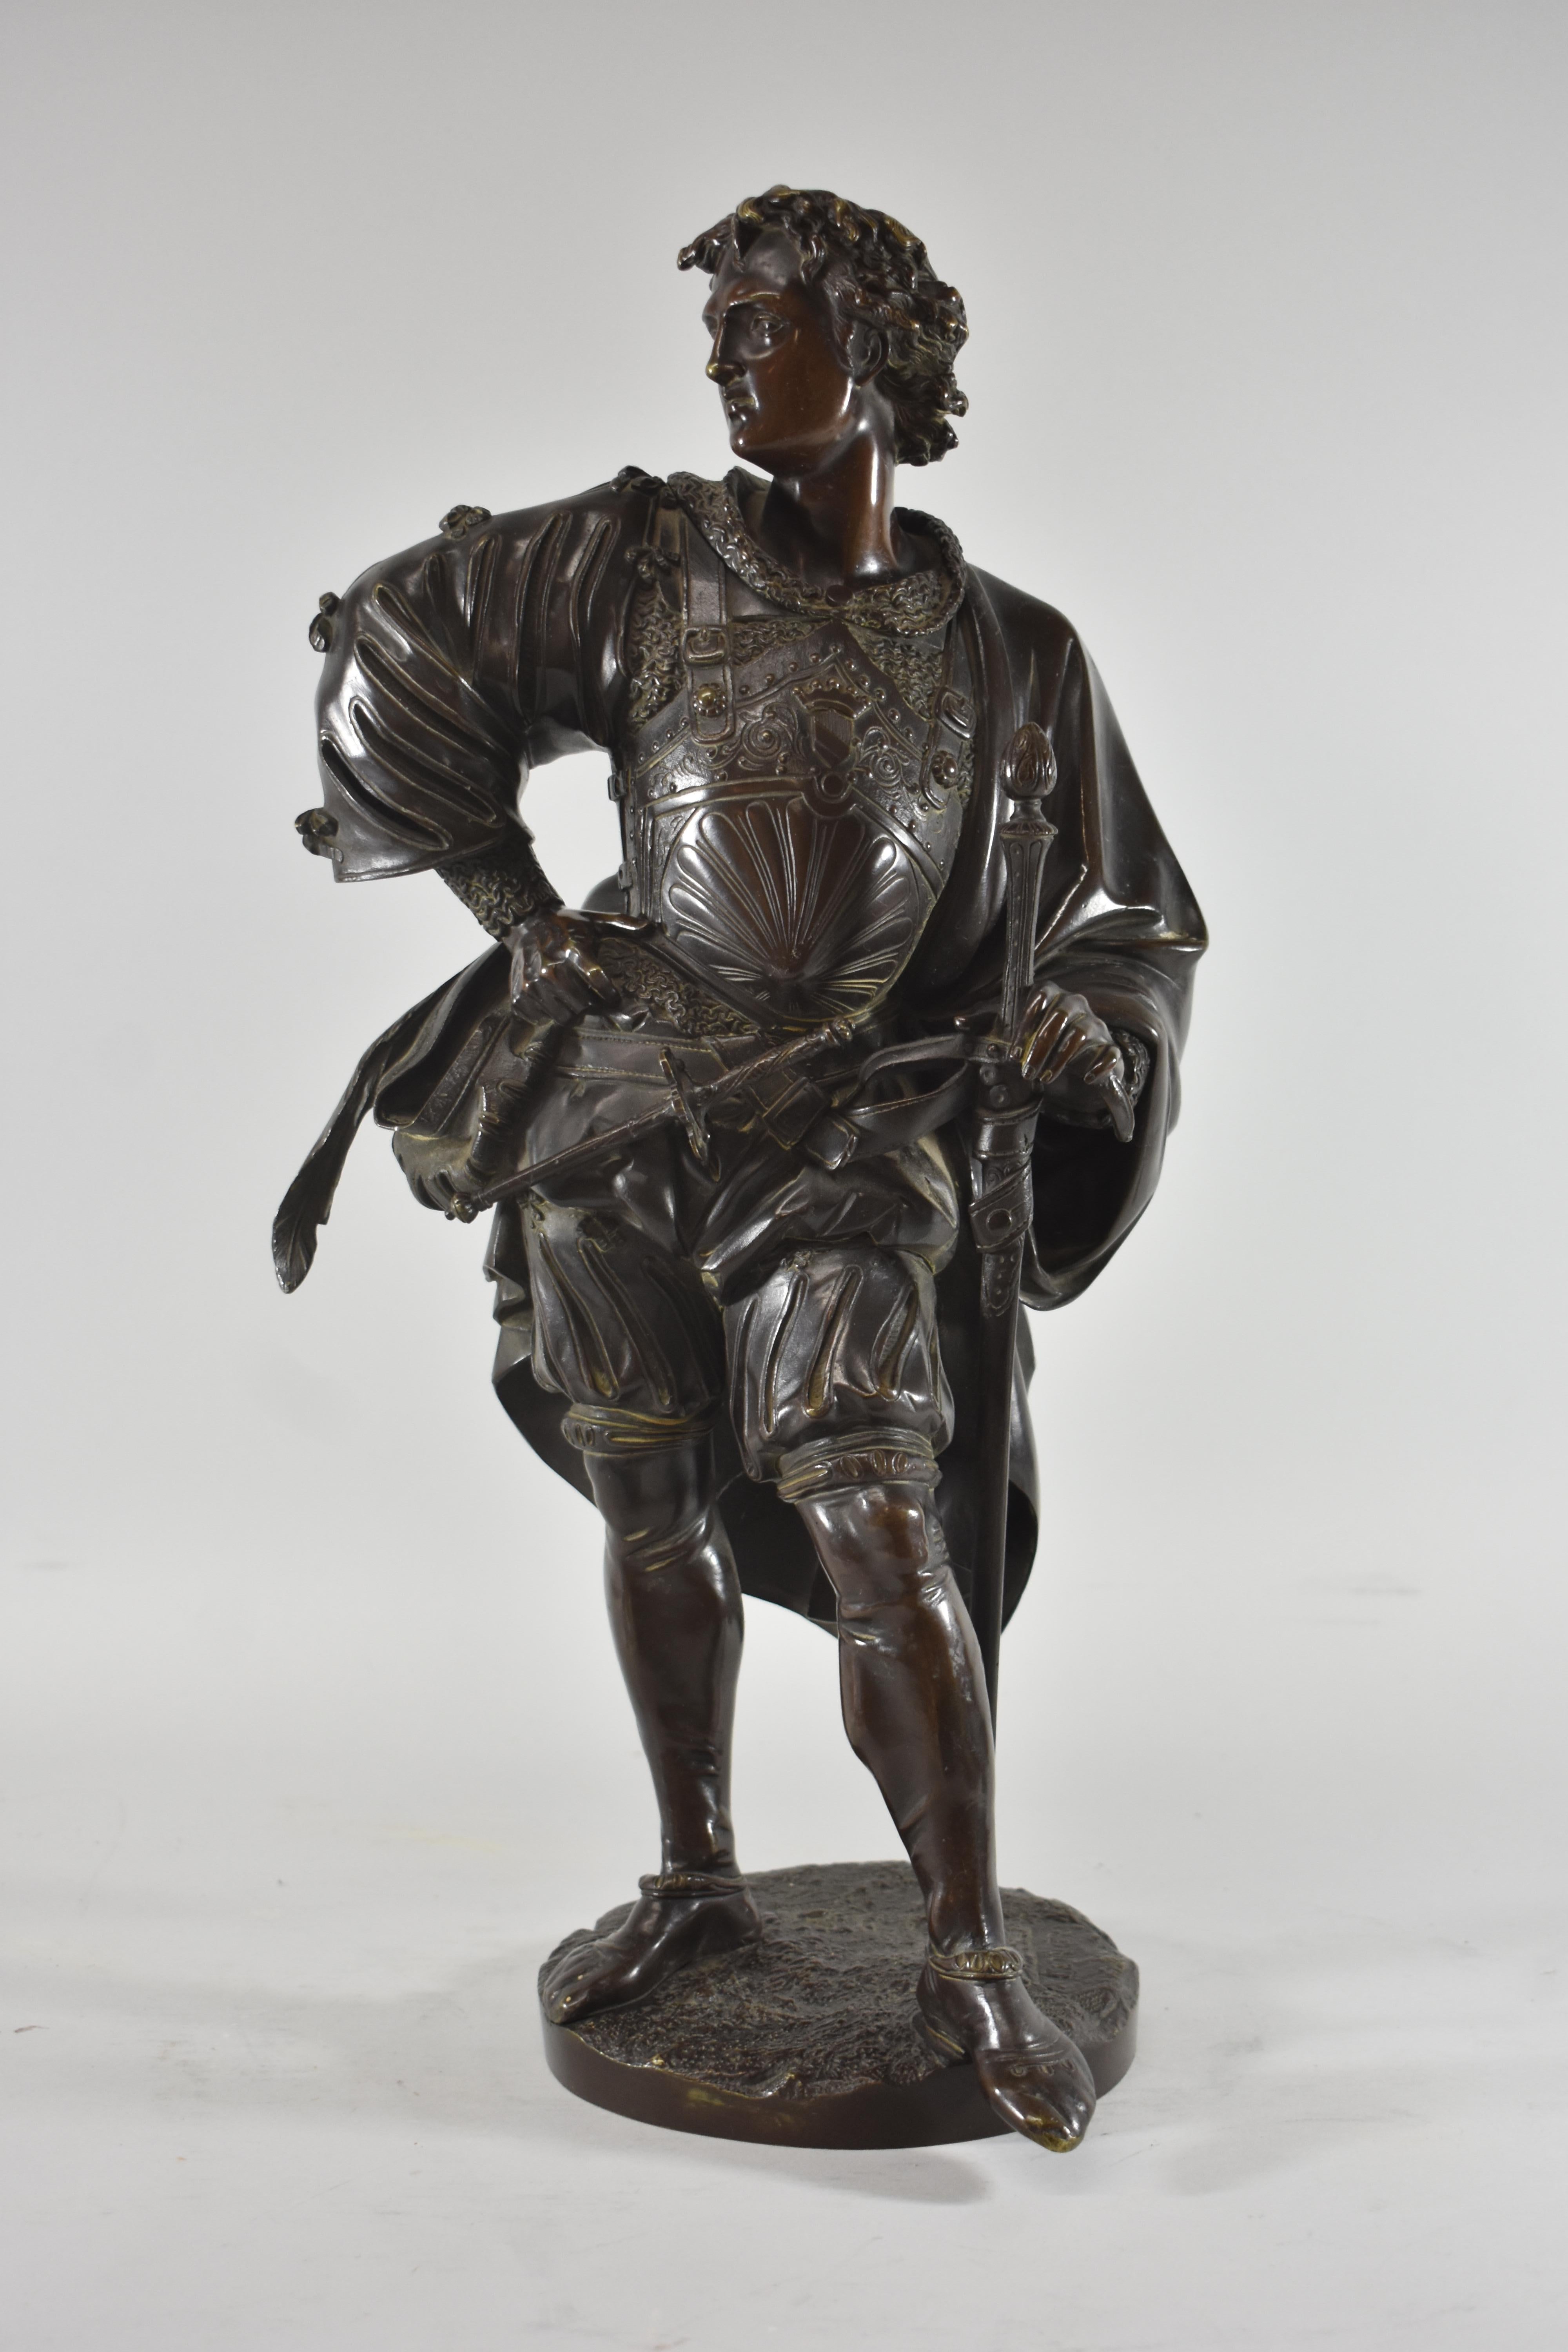 Bonze sculpture of man with sword holding his hat in his hand by French artist Albert Ernest Carrier. Belleuse 1824-1887. Defreville etched on the underside and #9 marked on the side. 18